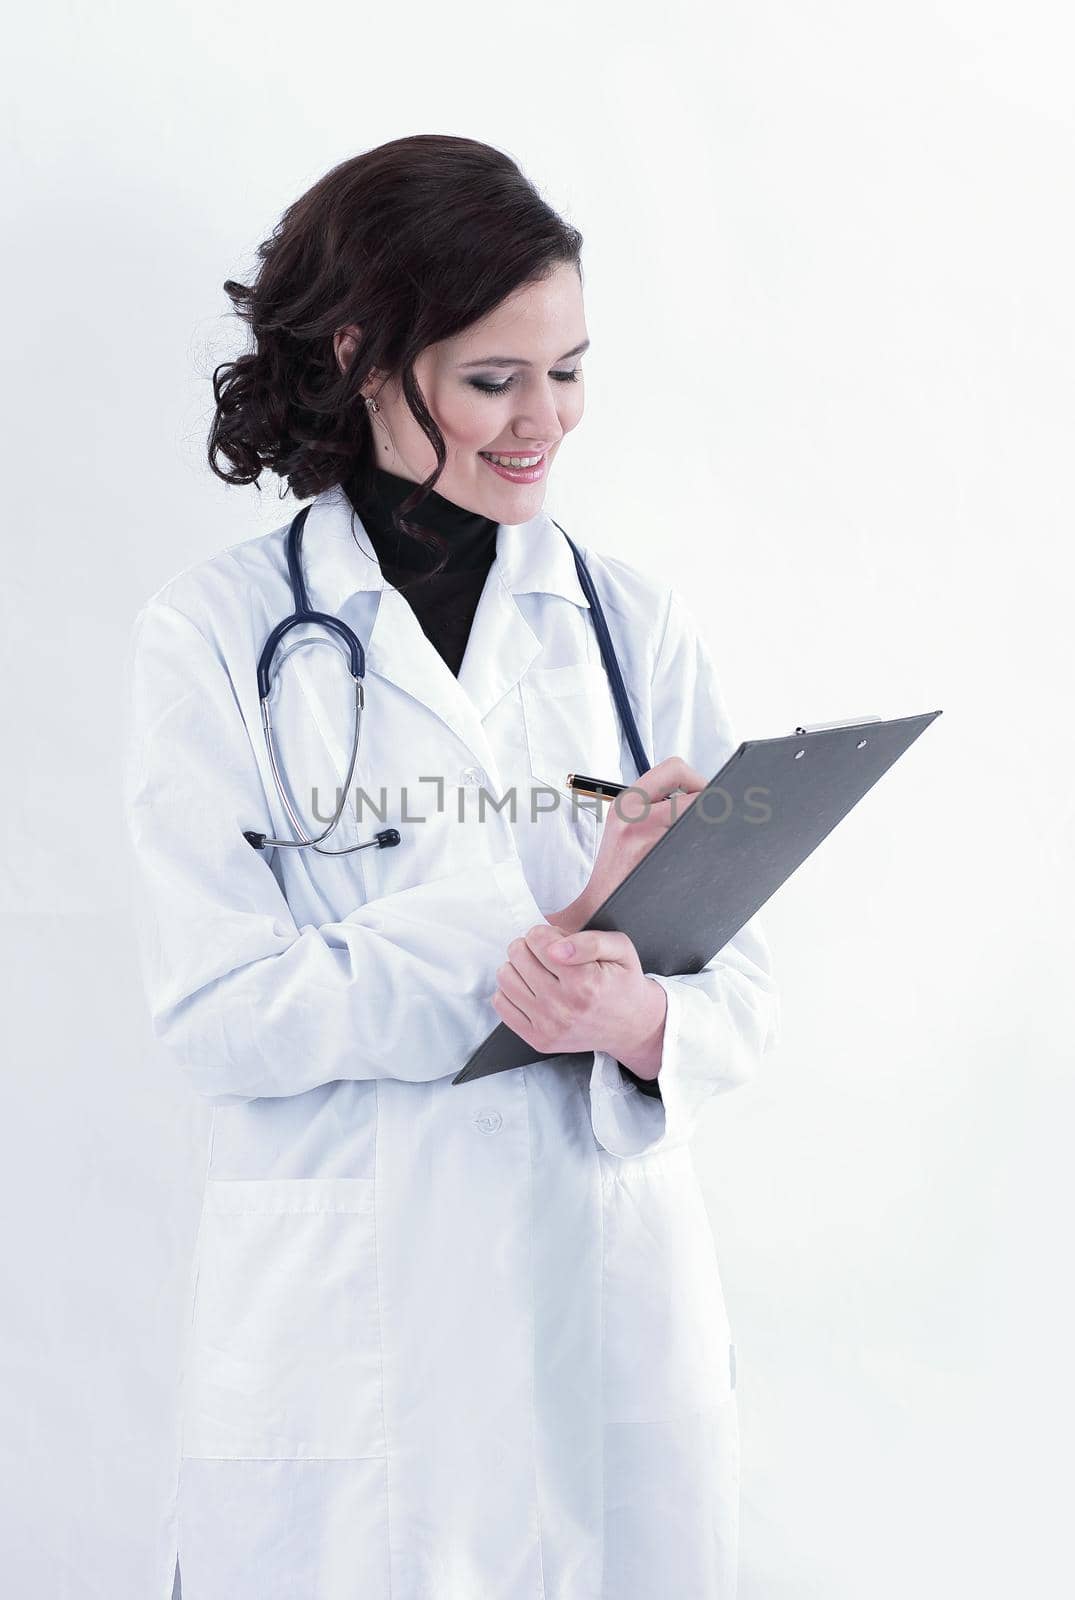 female doctor making notes in the medical record.photo with copy space